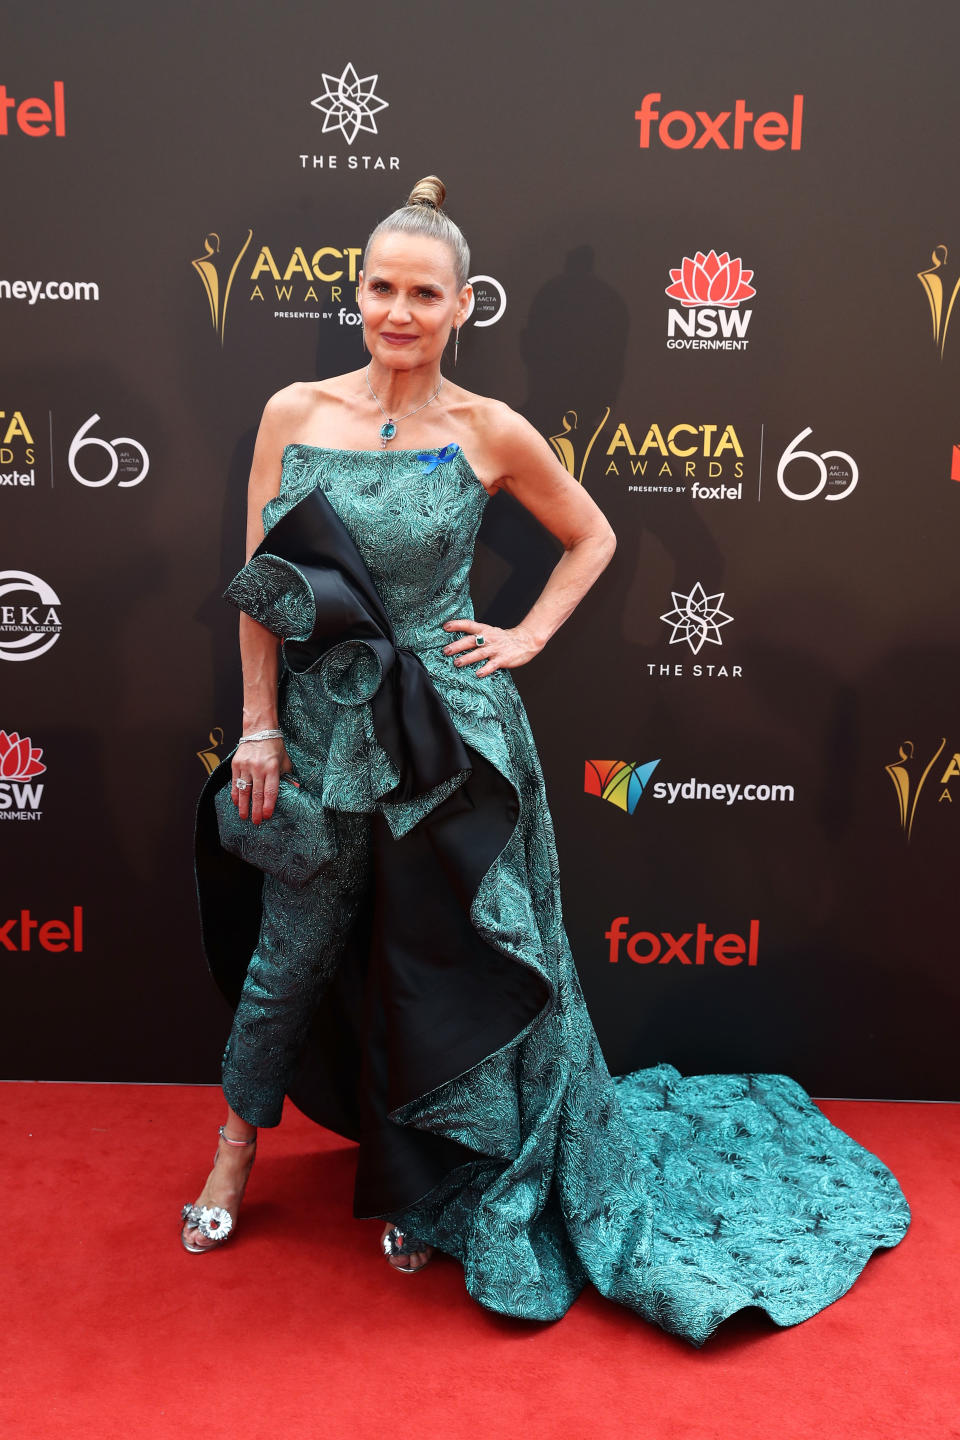 Selling Houses Australia star Shaynna Blaze at the 2018 AACTA awards in Sydney on Wednesday. Photo: Getty